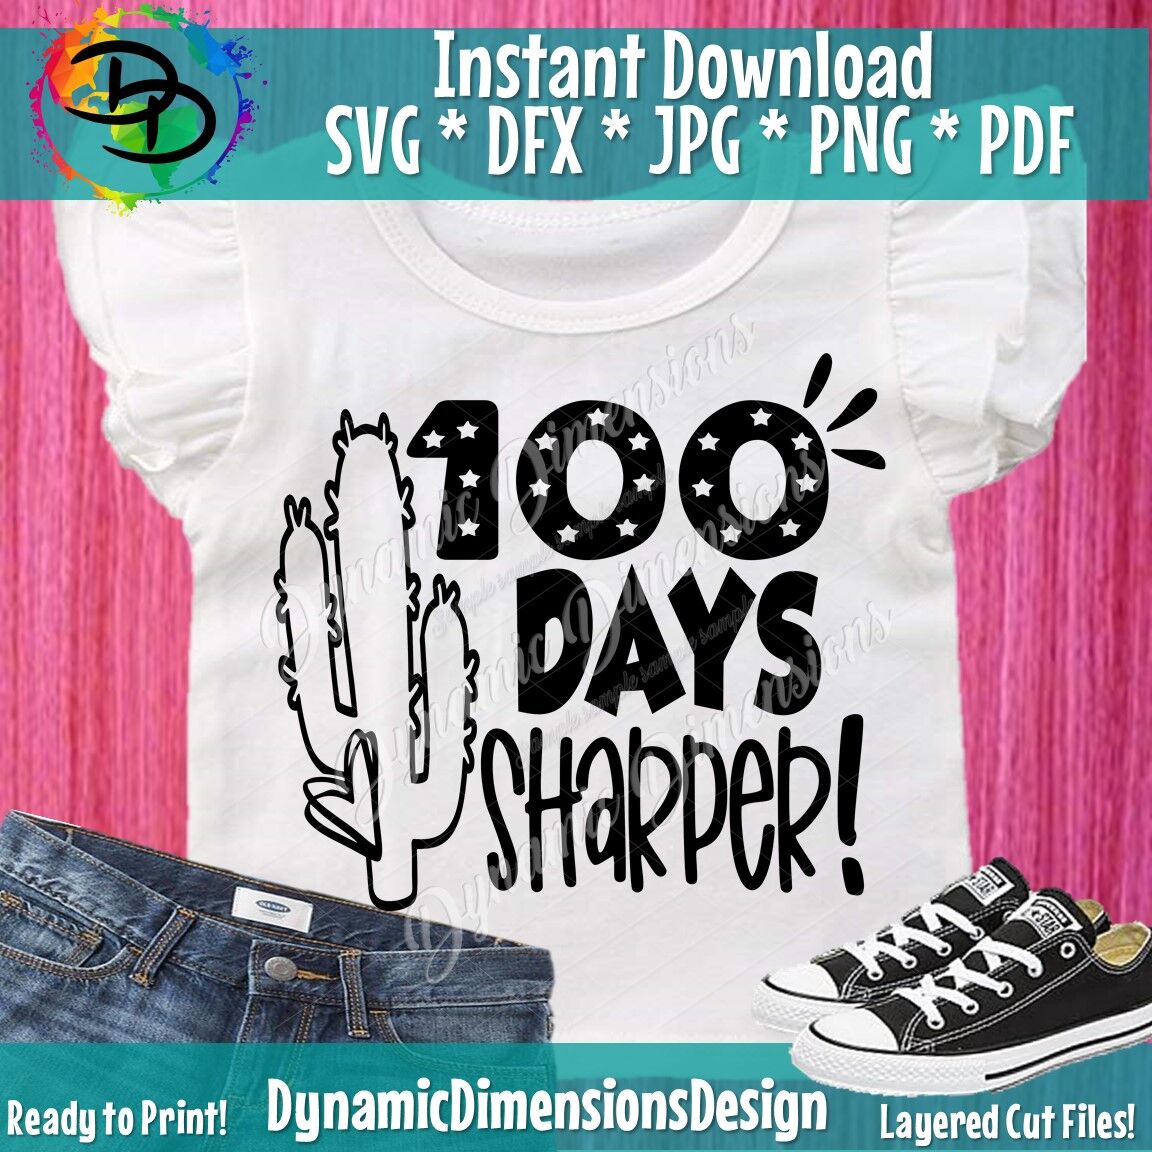 ori 3677298 2g3xsczw07e75q7wv962668ziccpij0qeevp08lq 100 days sharper svg 100th day of school cut file girl 039 s shirt design kid 039 s cactus saying funny quote dxf png silhouette or cricut svg